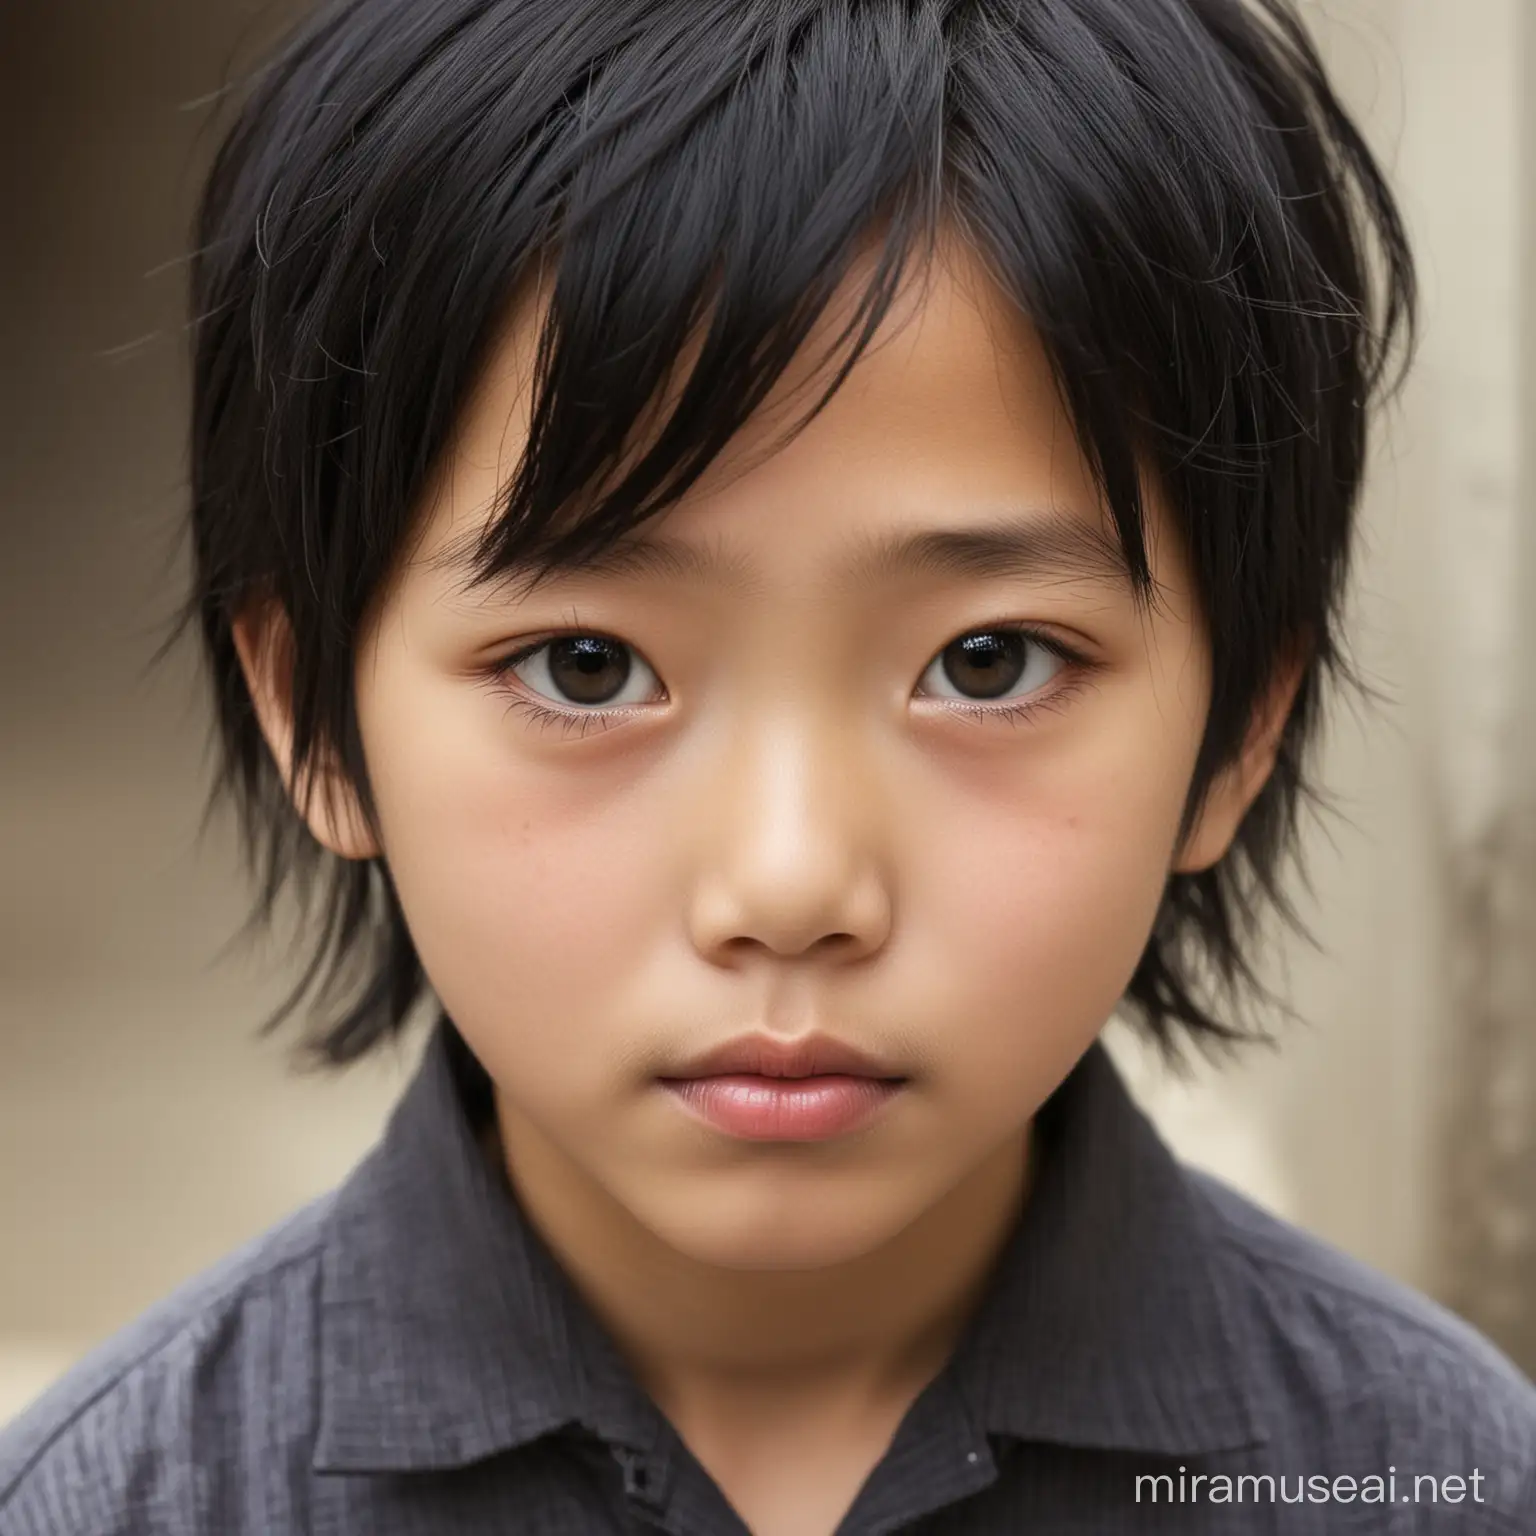 Adorable 7YearOld Asian Boy with Black Hair and Fair Complexion